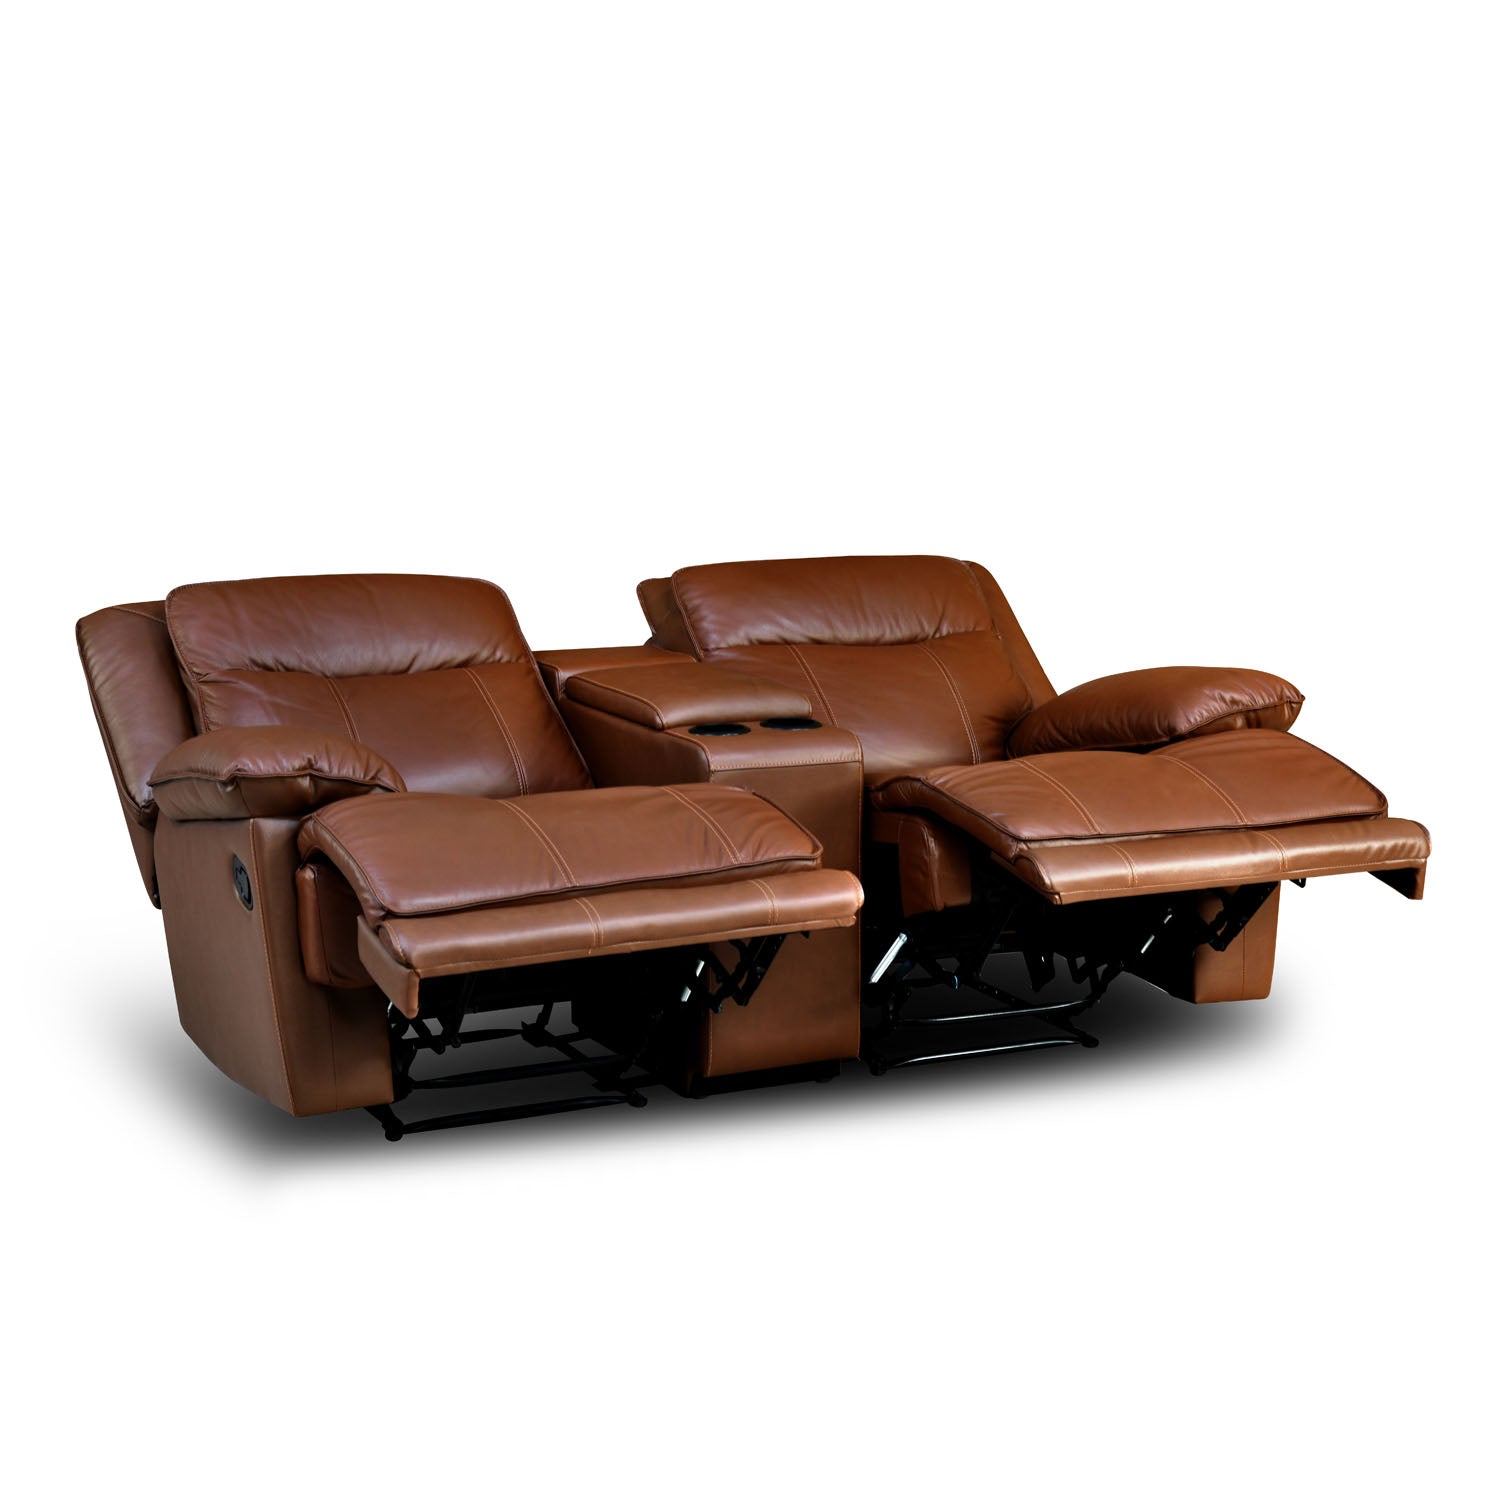 Hayes 2 Seater Leather Manual Recliner with Console (Brown)